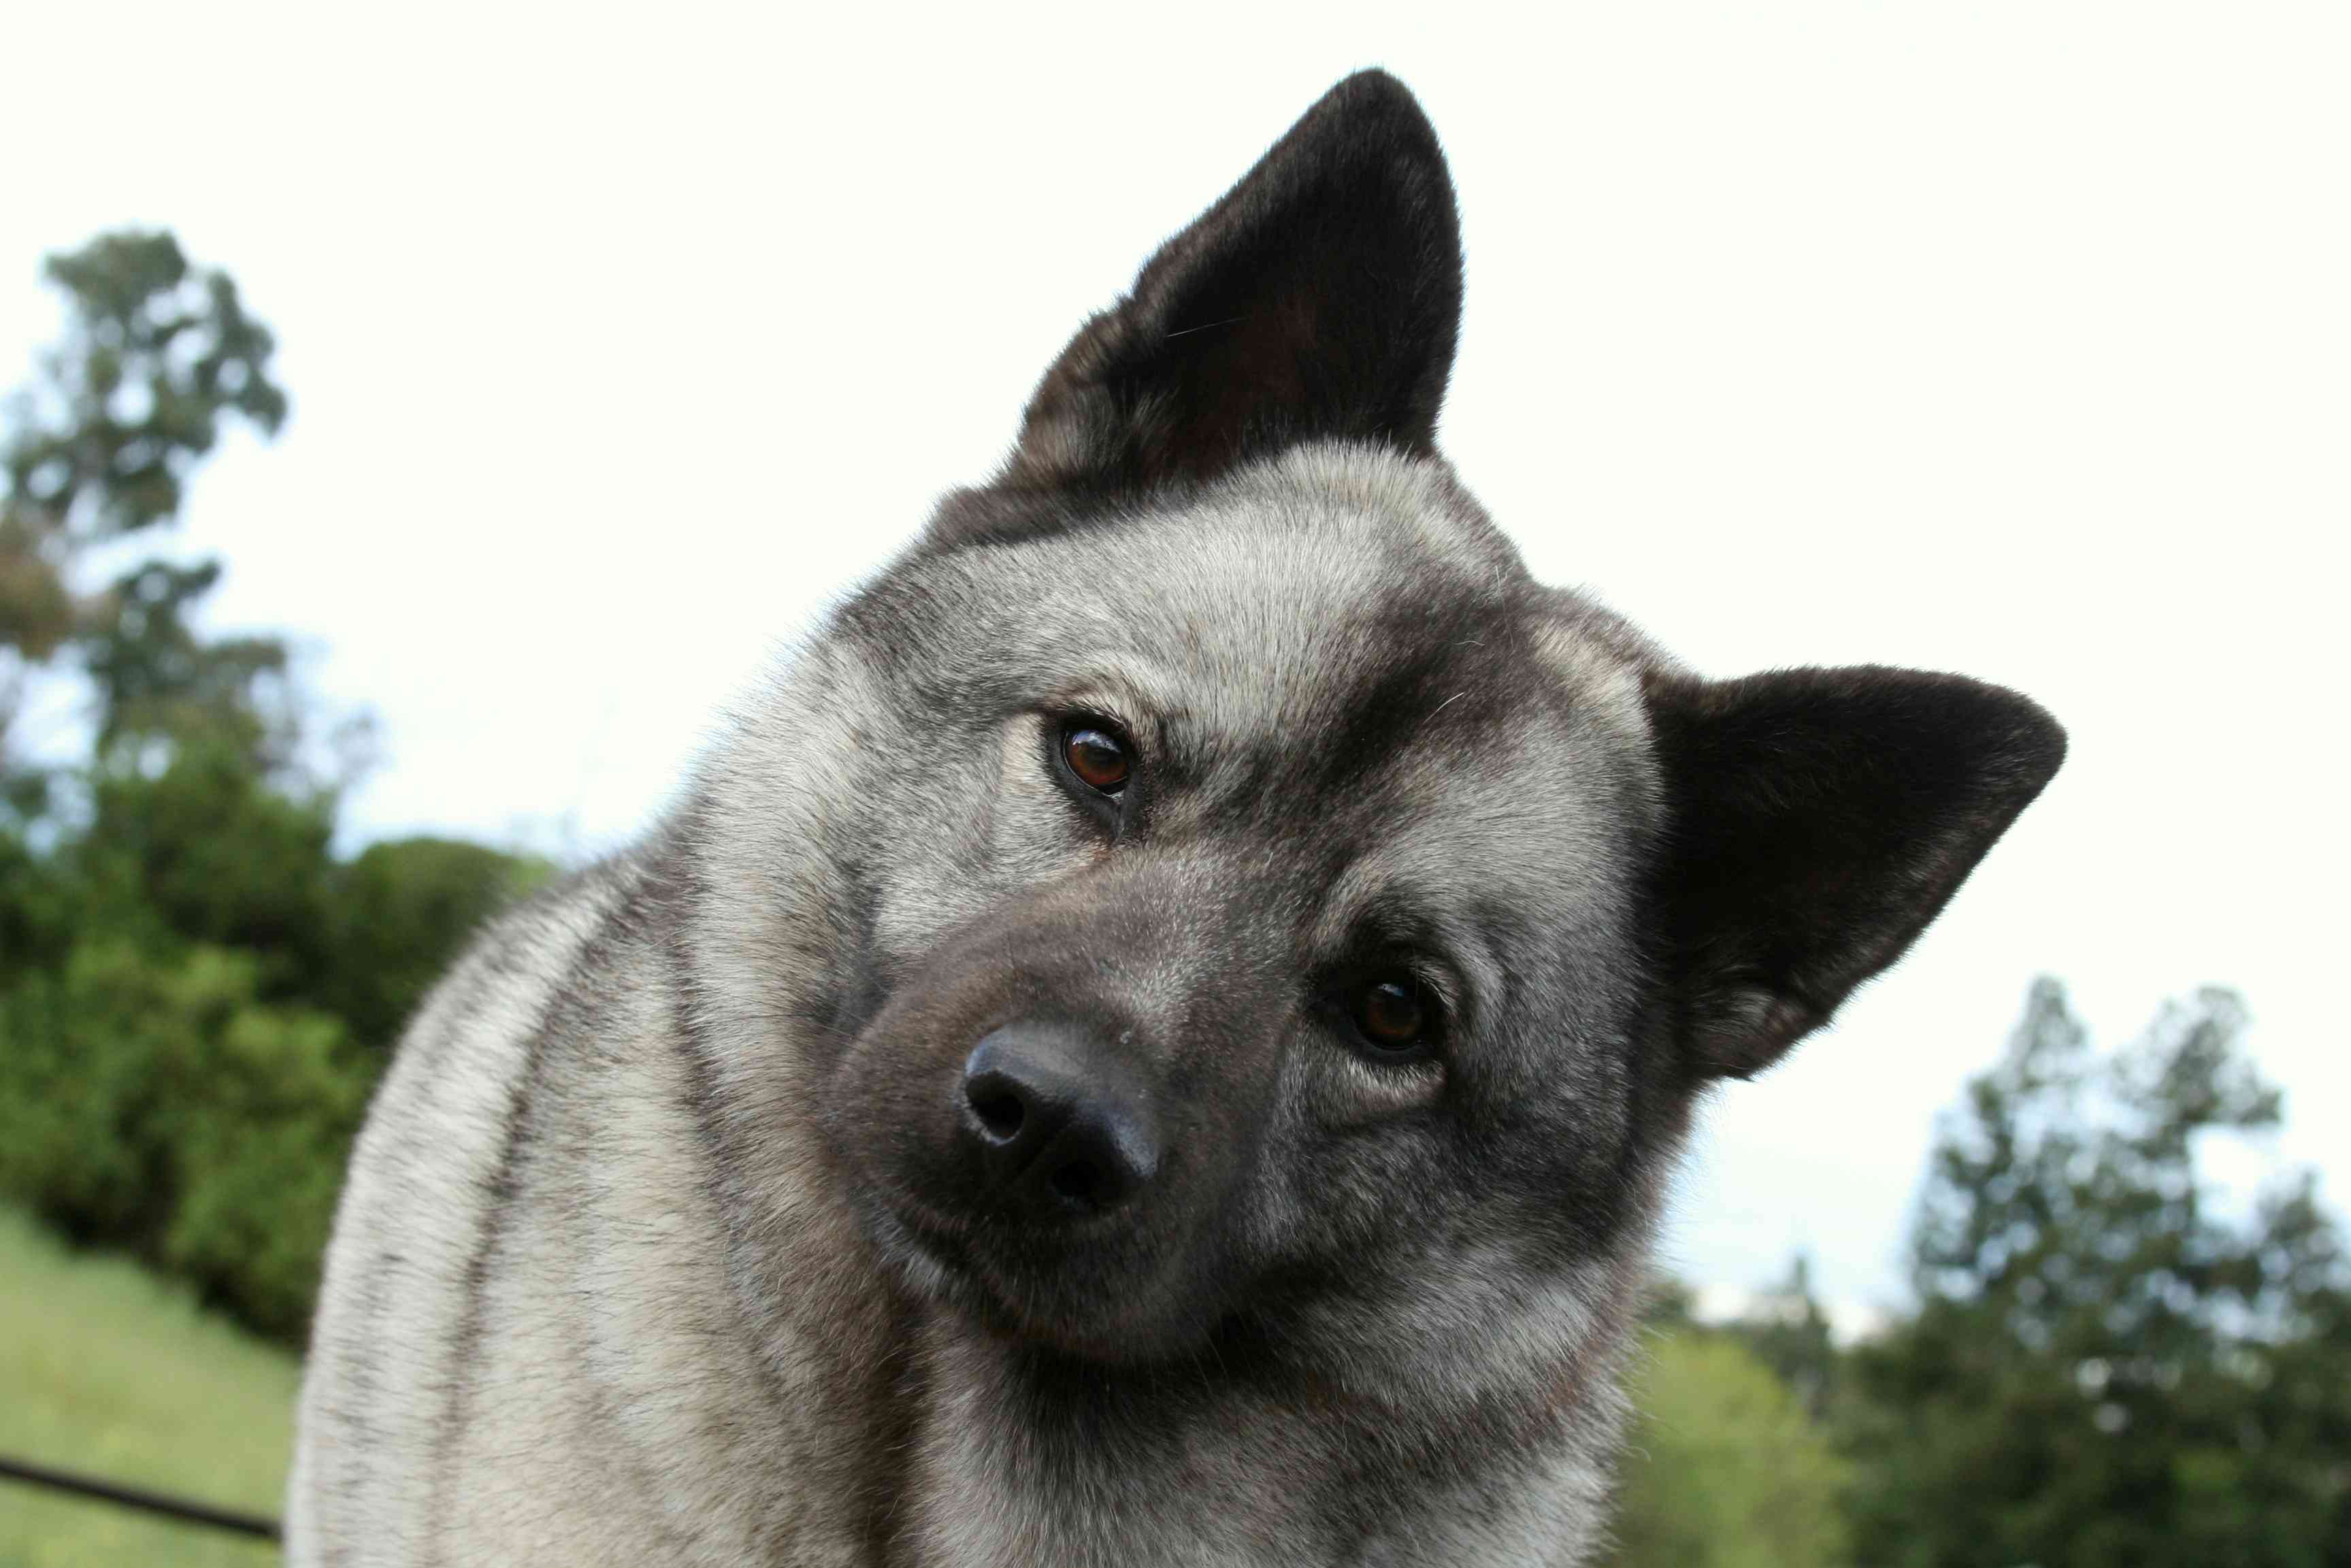 Norwegian Elkhound profile shot with head tilting to the sides